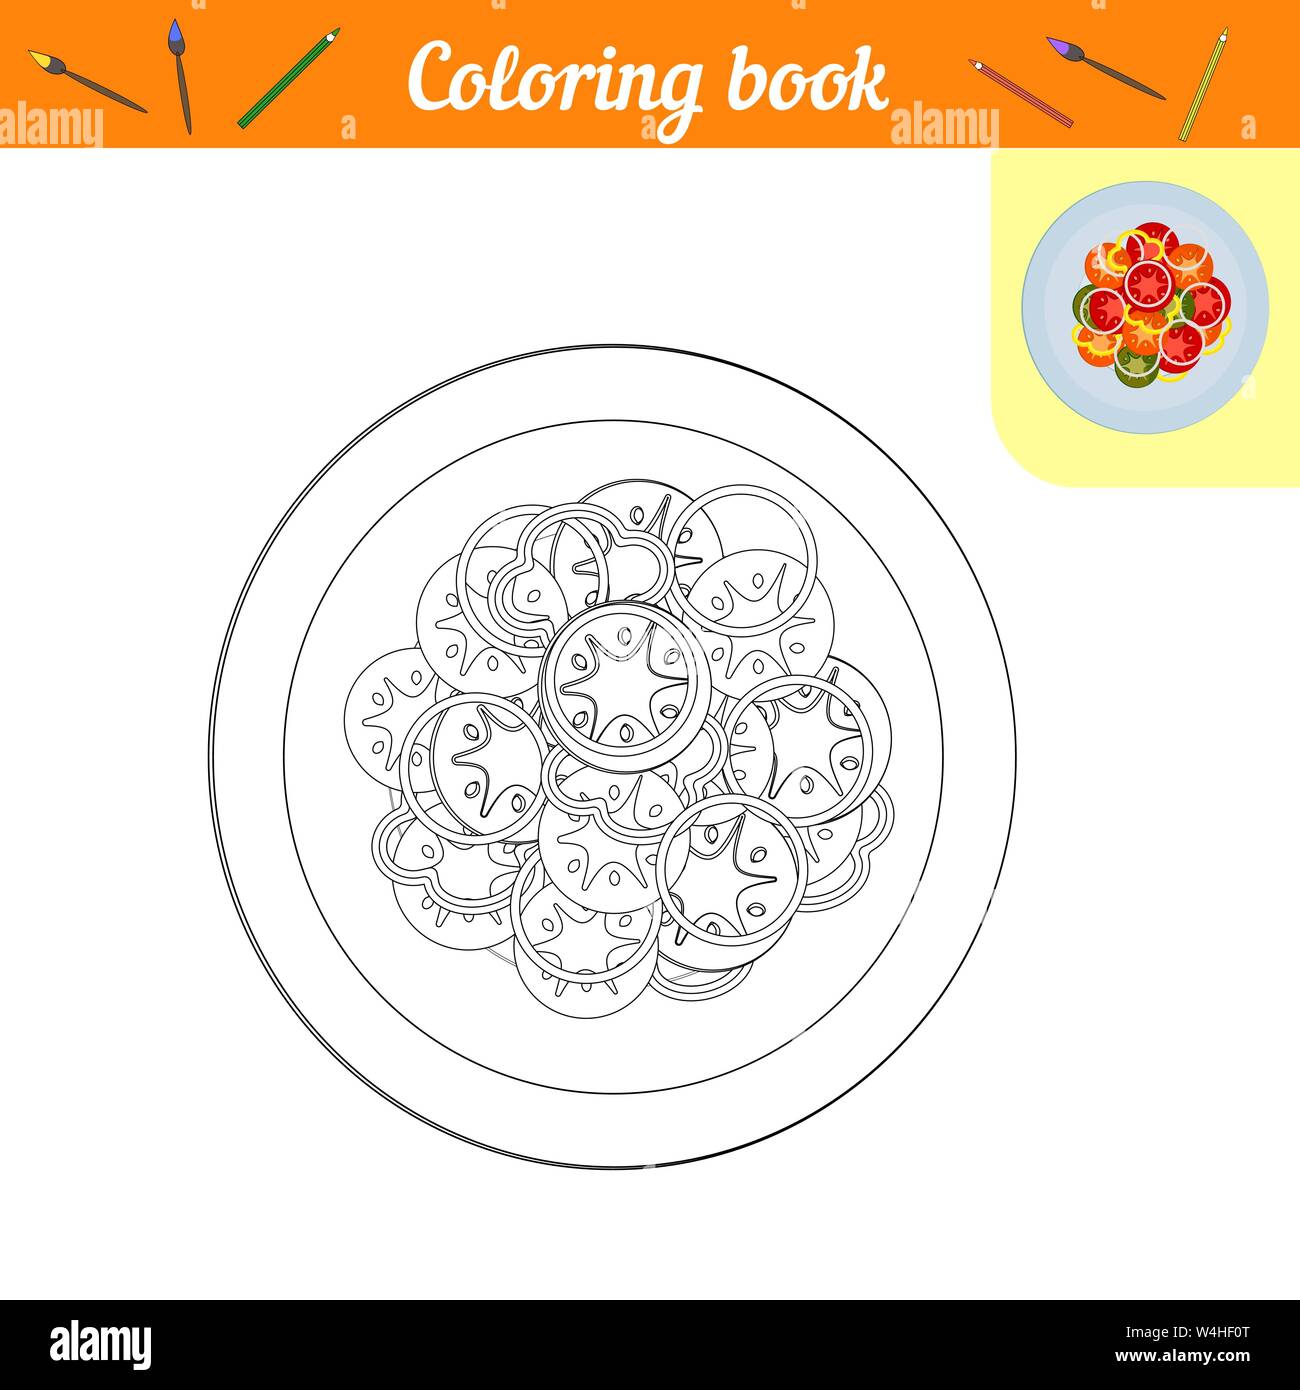 Coloring book. Vegetables on a plate. Painting Lunch or dinner. Page of black and white lines with a color example. Proper nutrition icon. Healthy foo Stock Vector